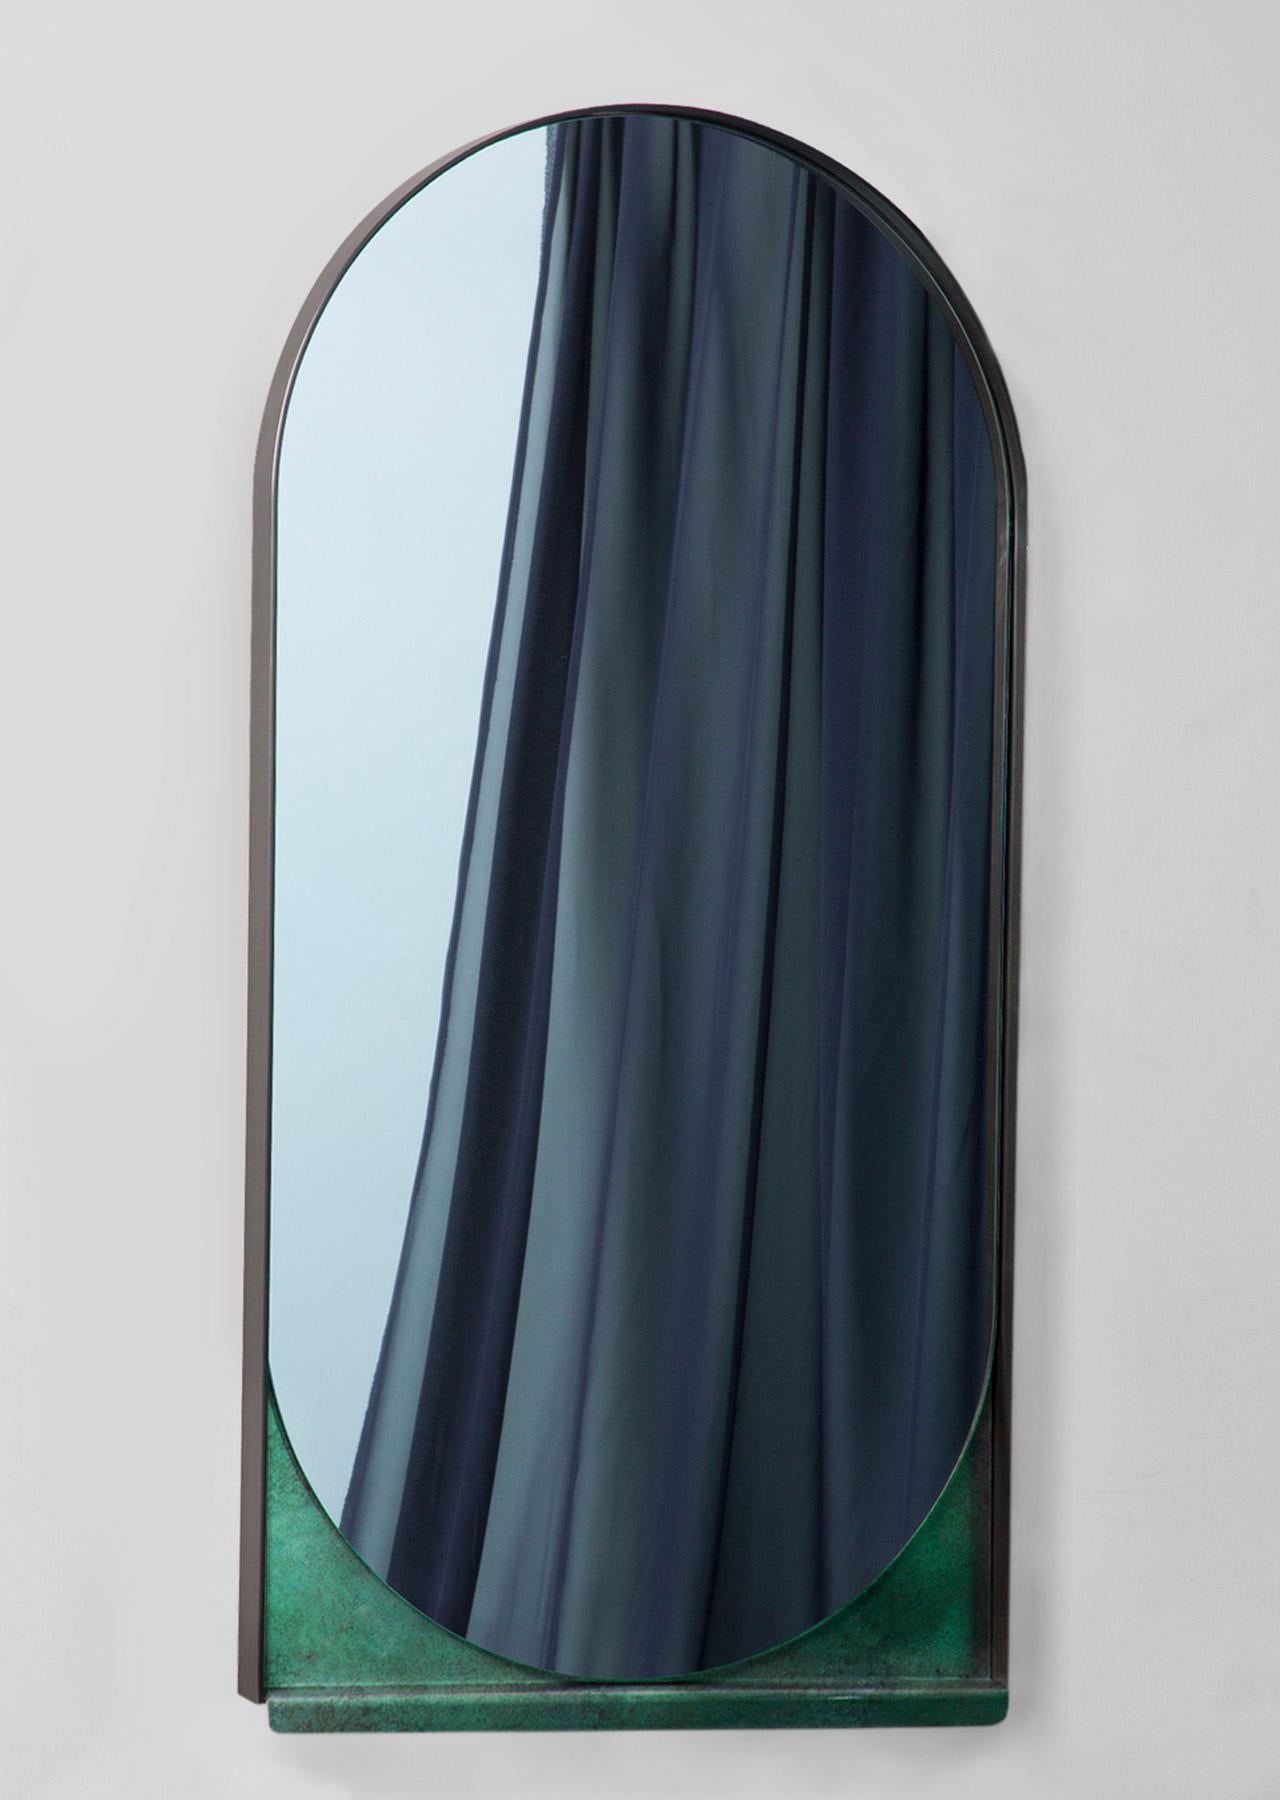 Simplicity is key to the Slip Mirror, whose thin blackened stainless steel frame delicately holds an oblong mirror. A contrasting verdigris shelf slips out from below, hinting at hidden layers beneath.
 